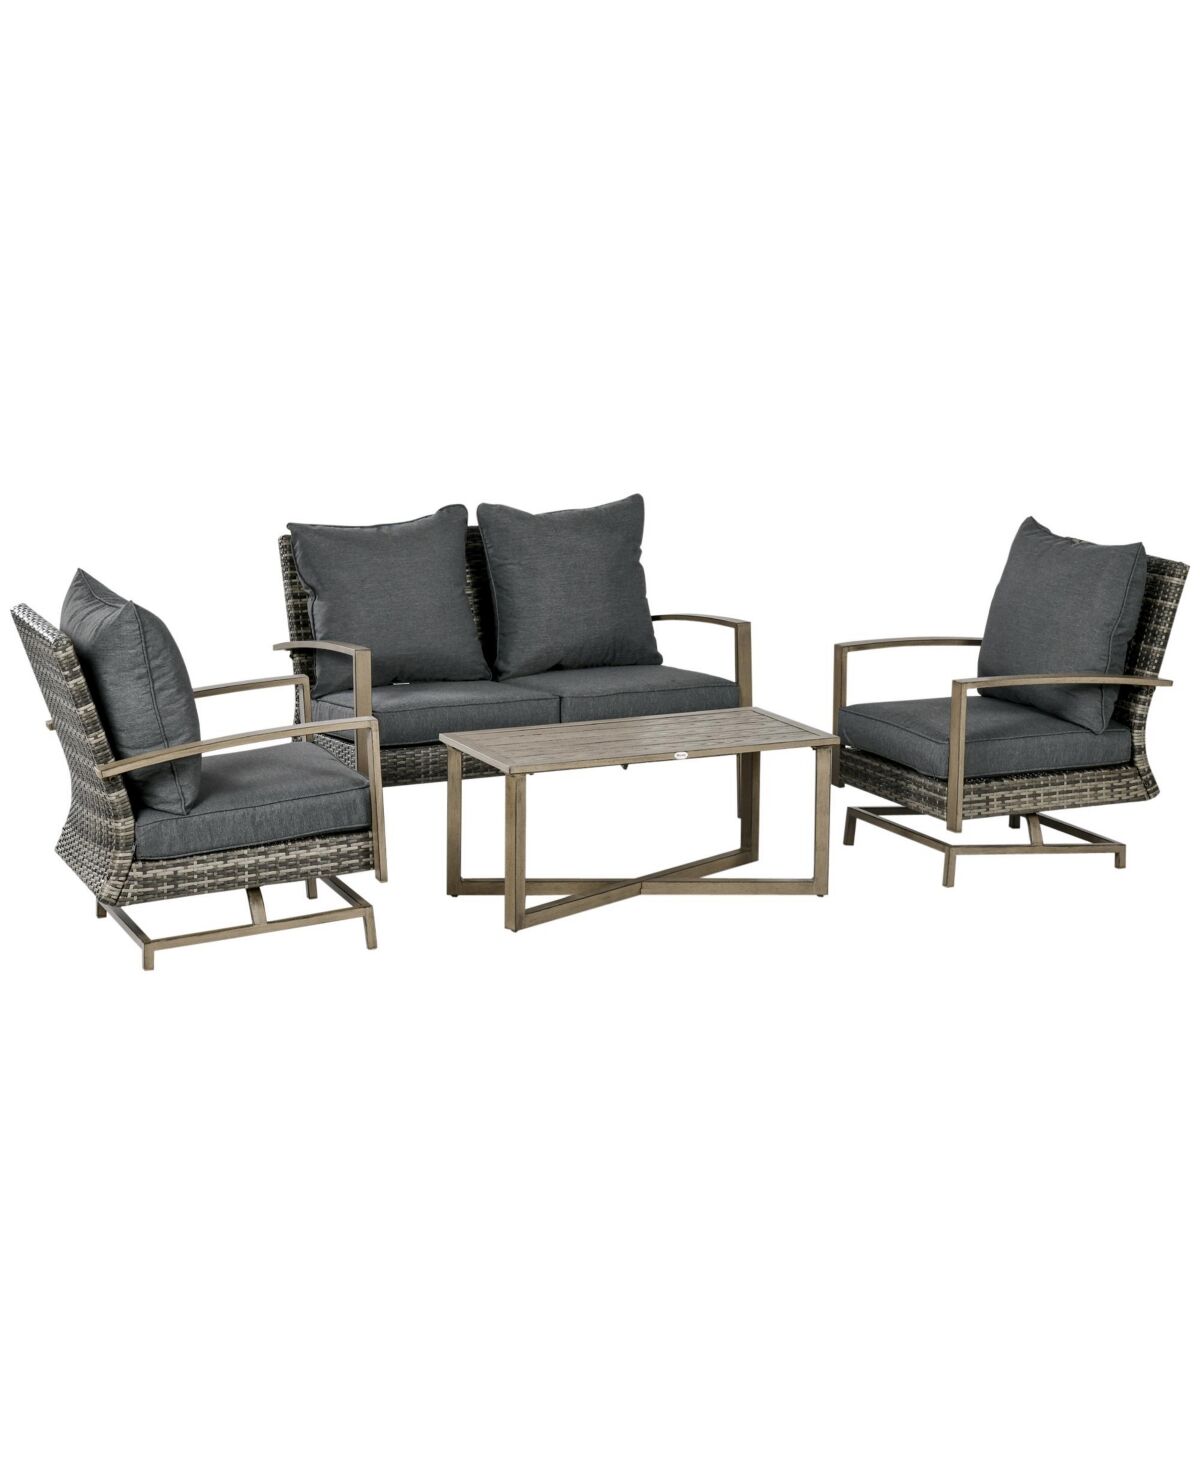 Outsunny Patio Furniture Set, 4 Piece Outdoor Rattan Conversation Set with 2 Armchairs, Cushions, Loveseat Sofa & Coffee Table for Porch, Poolside, La